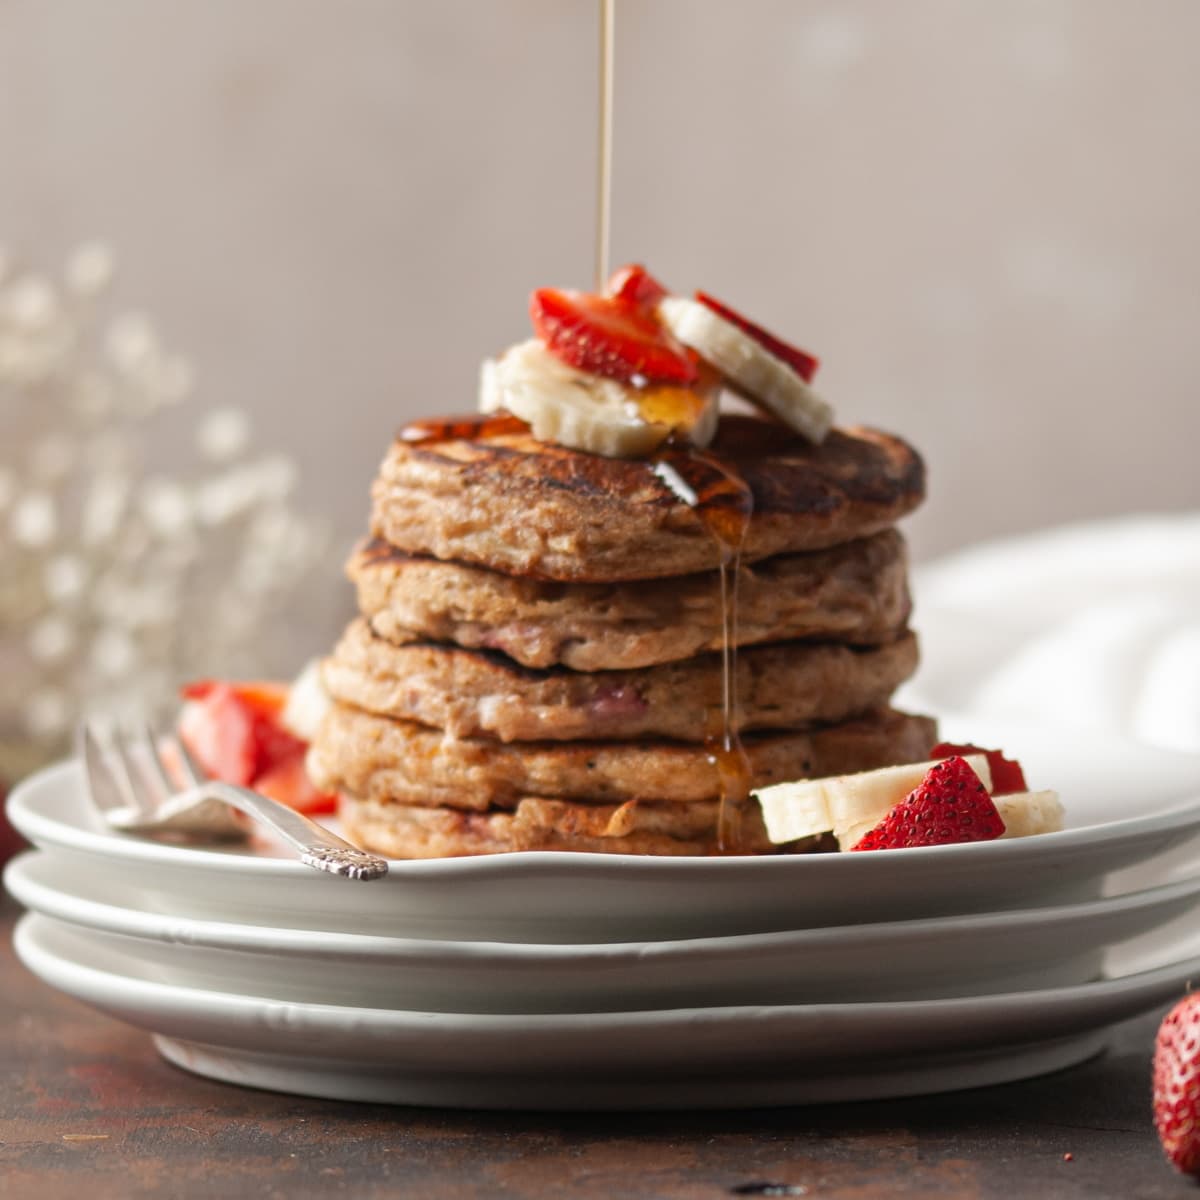 stack of whole wheat pancakes with bananas and strawberries and syrup being drizzled on top